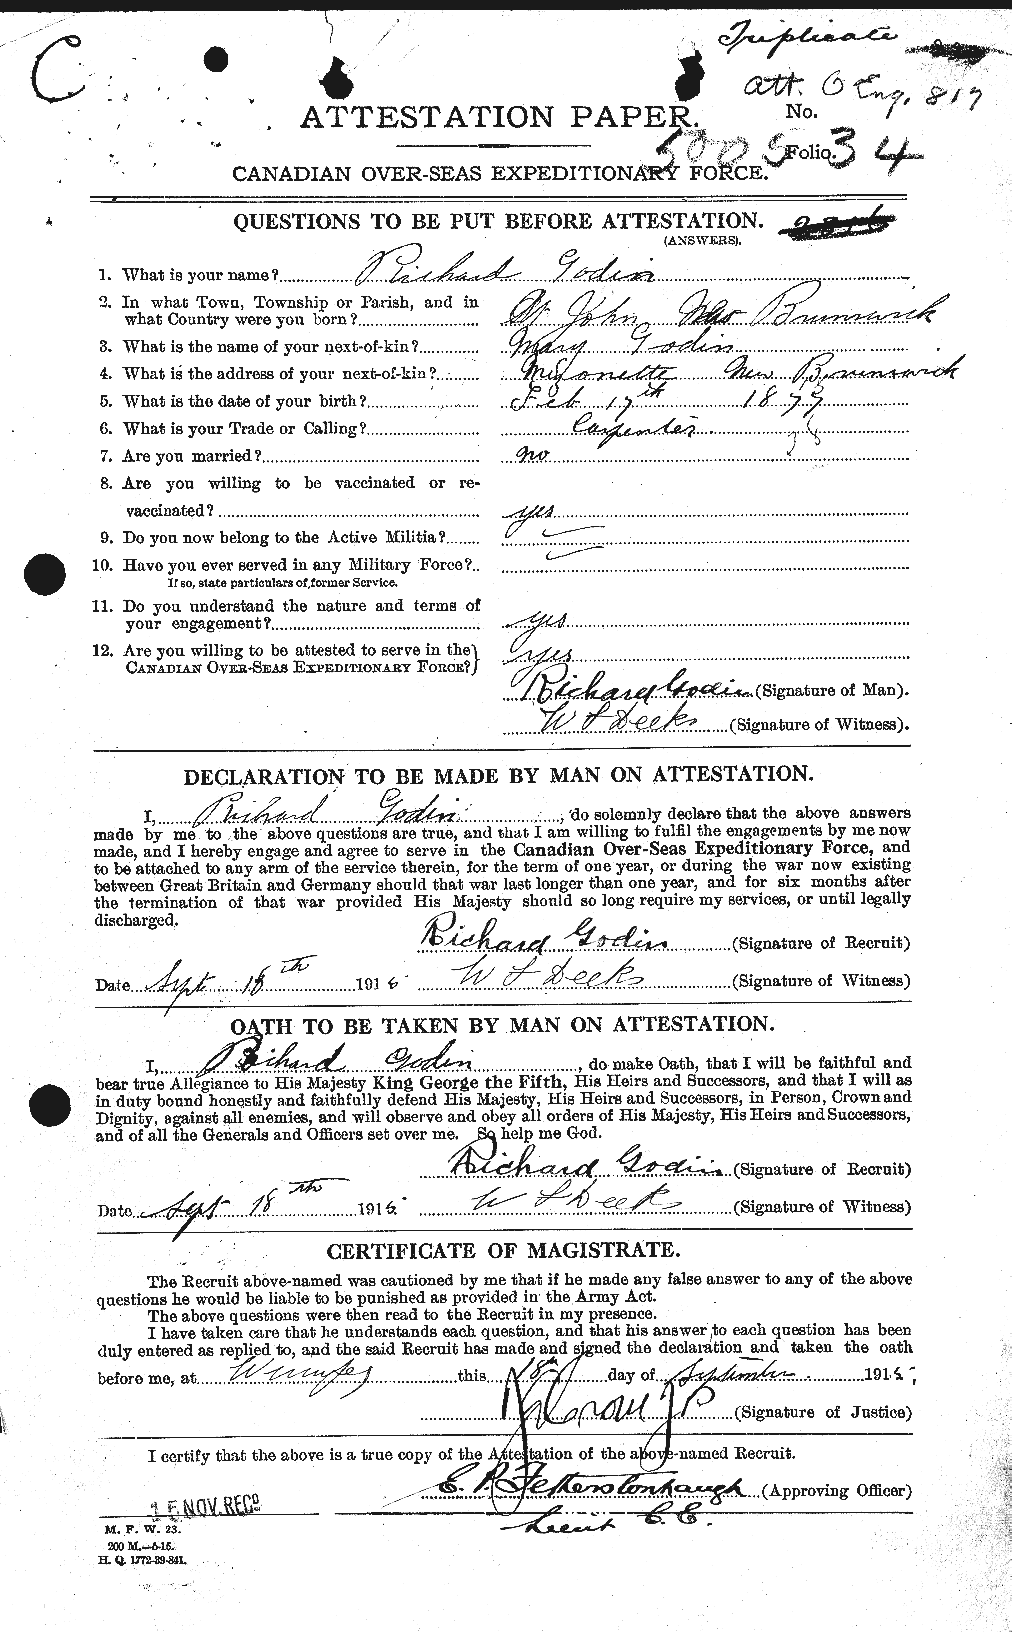 Personnel Records of the First World War - CEF 354572a